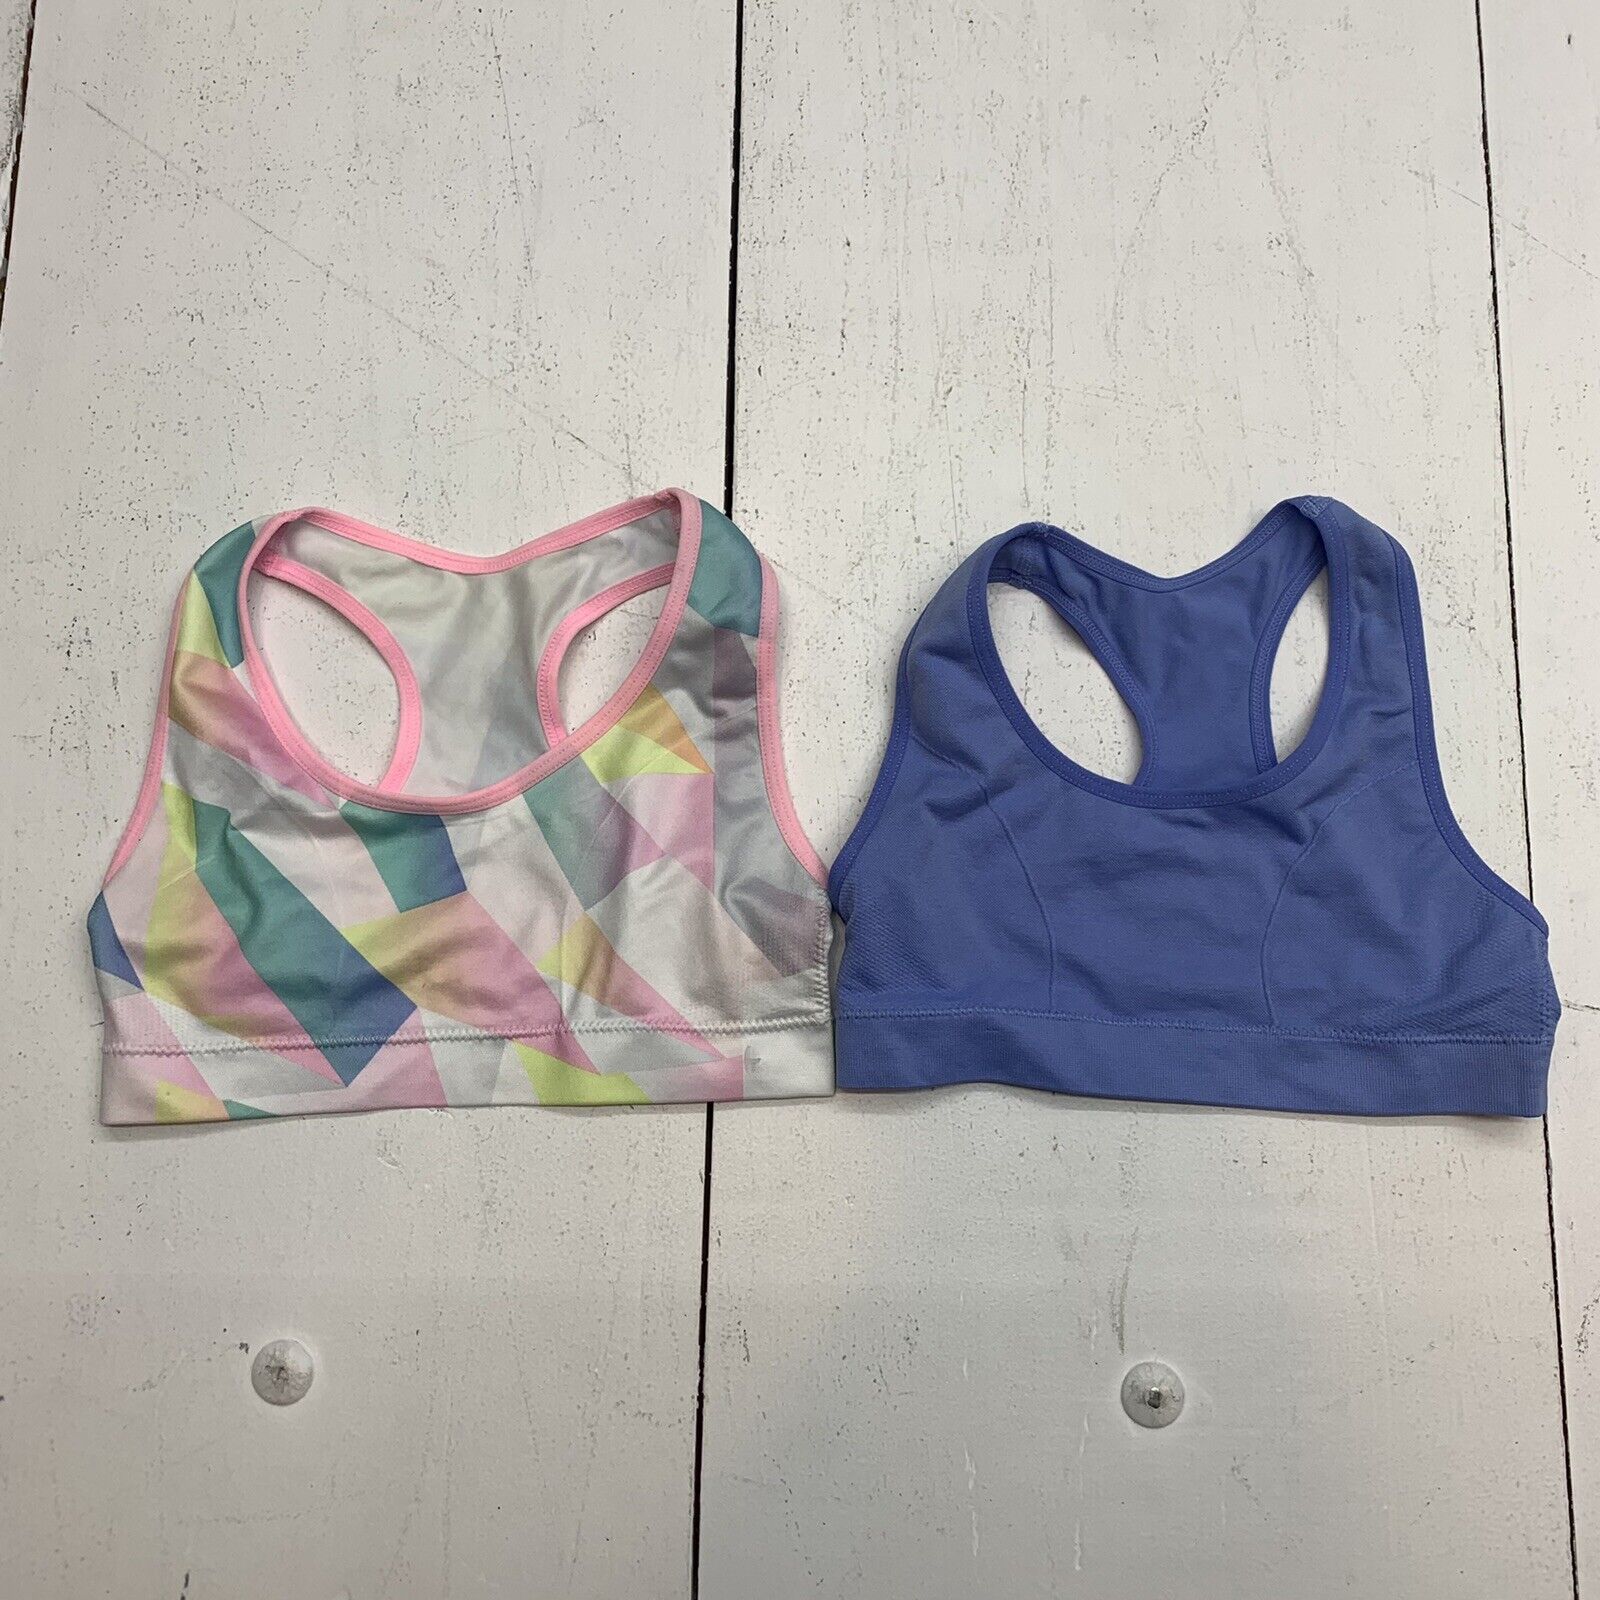 Dunnes Stores - Our much-loved sports bras now come in two